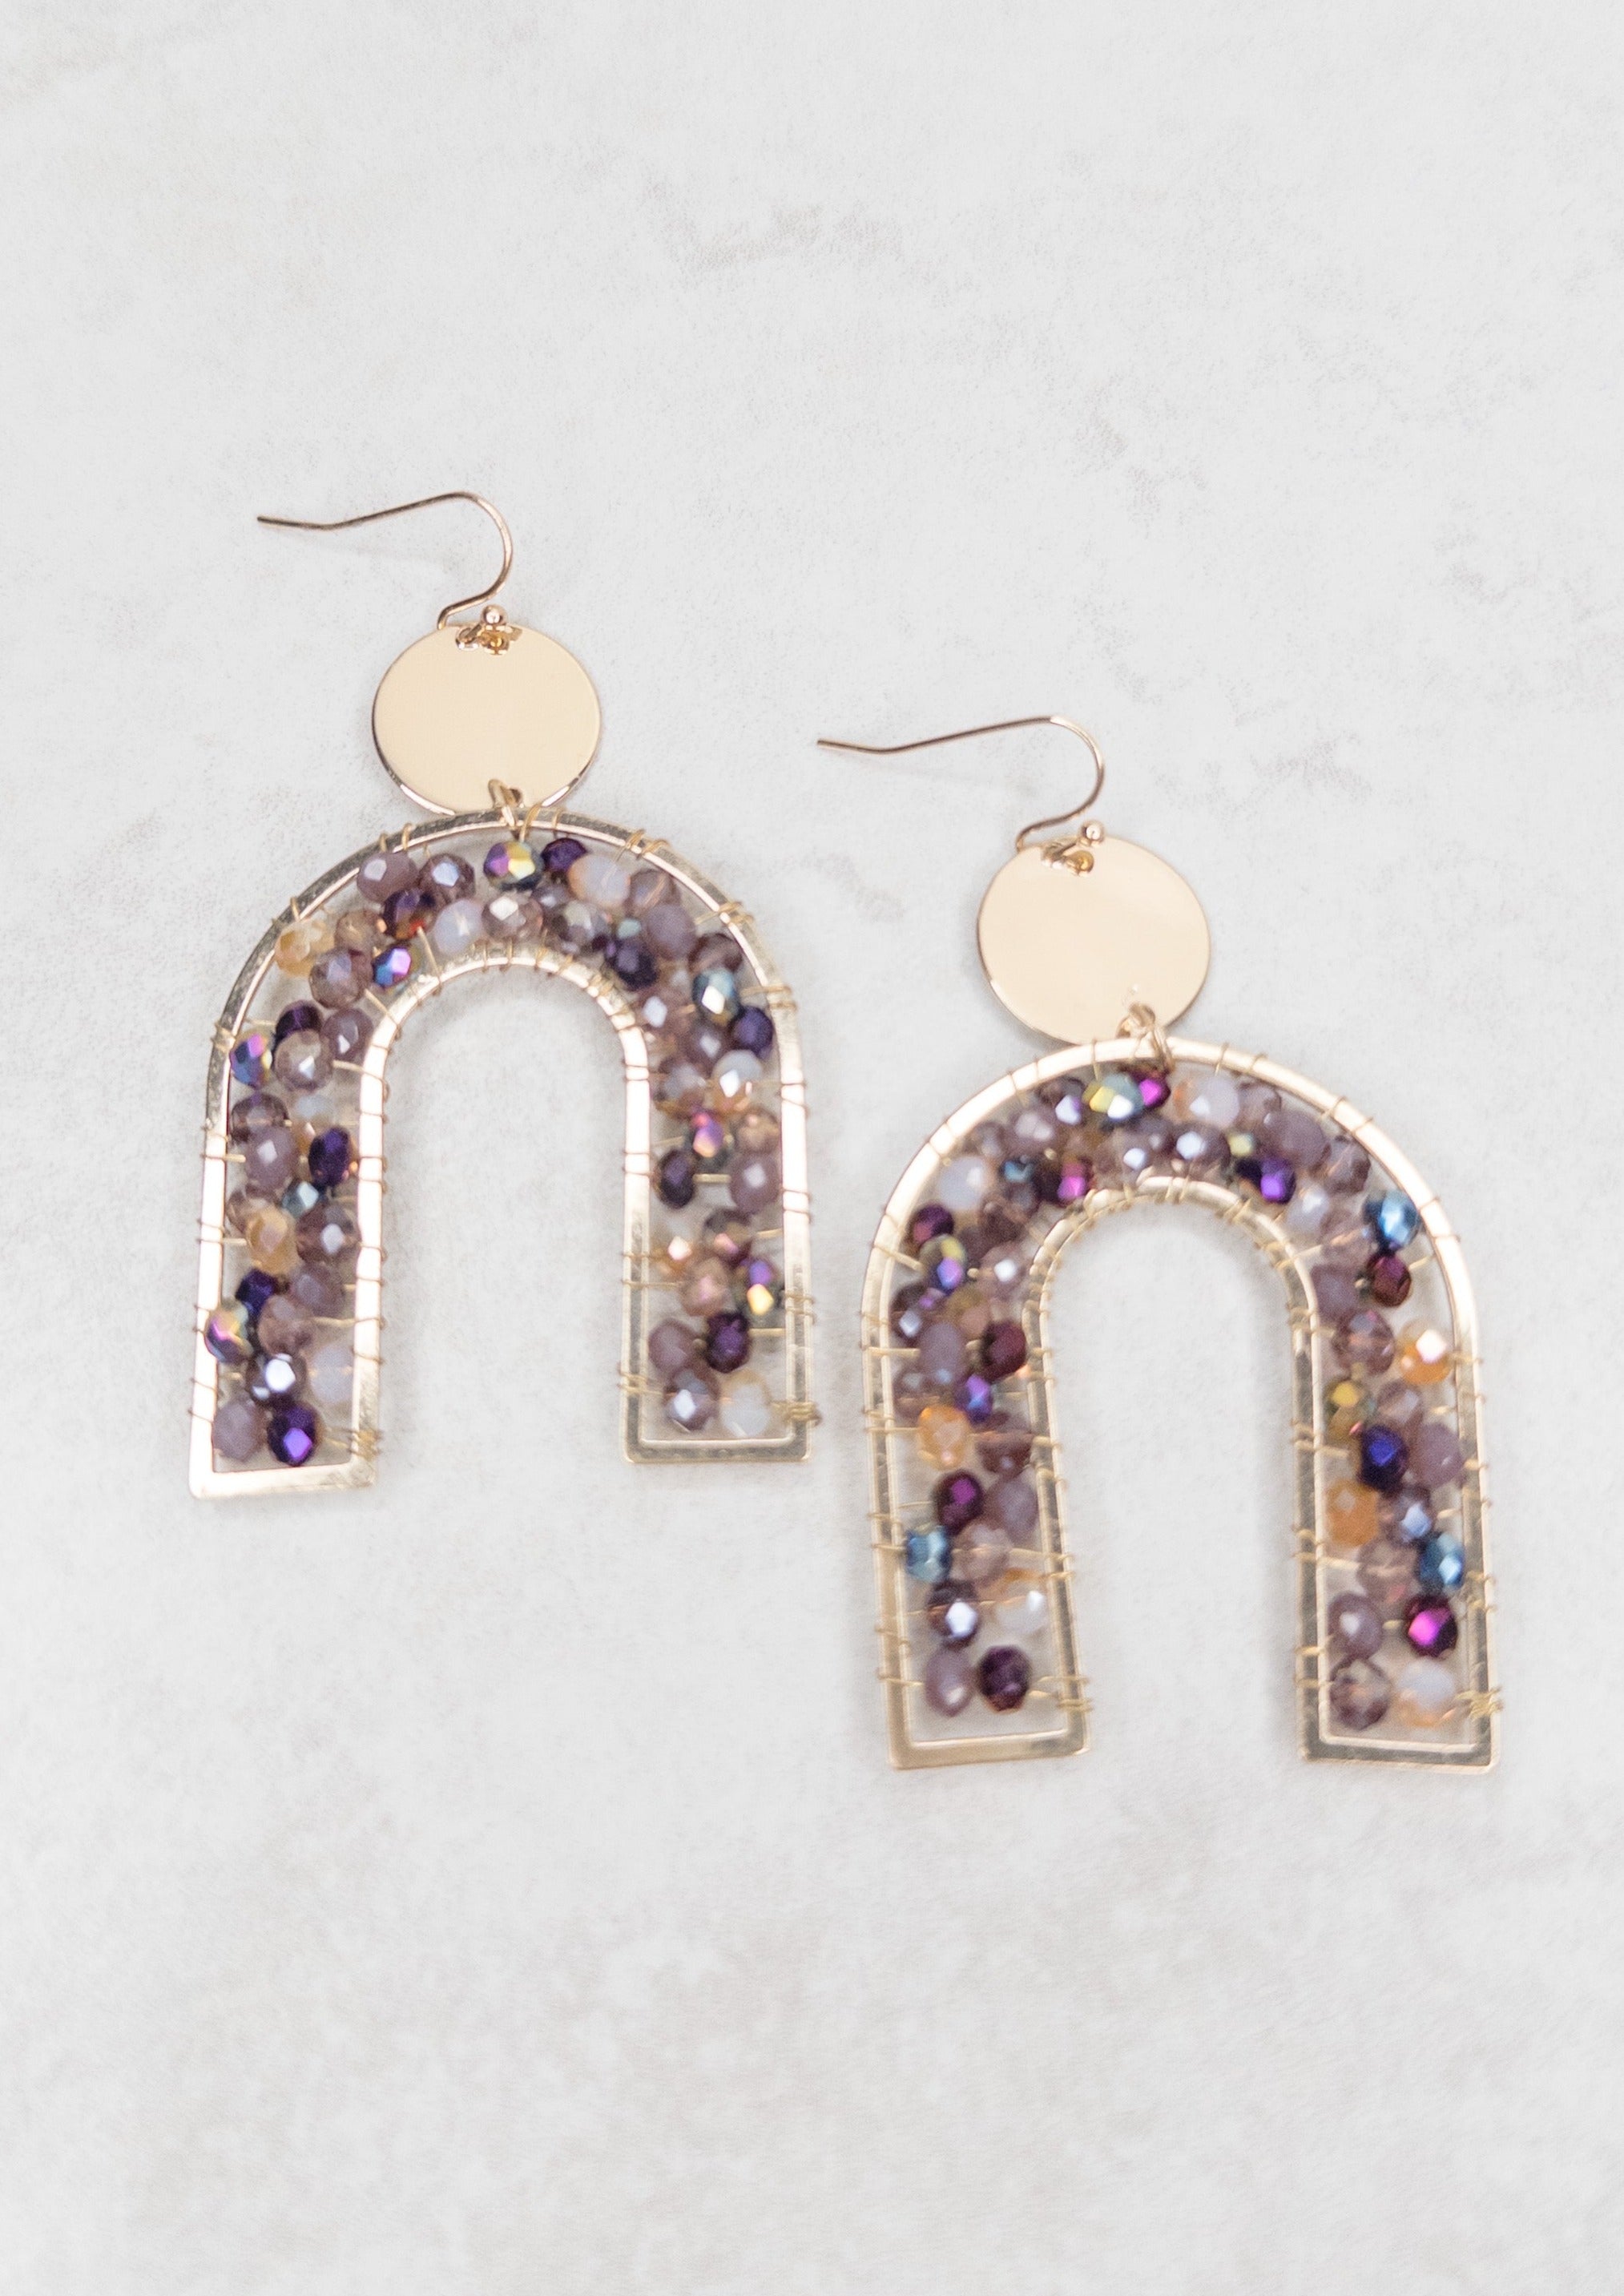 Shades of Purple Beads and Gold Rainbow Earrings